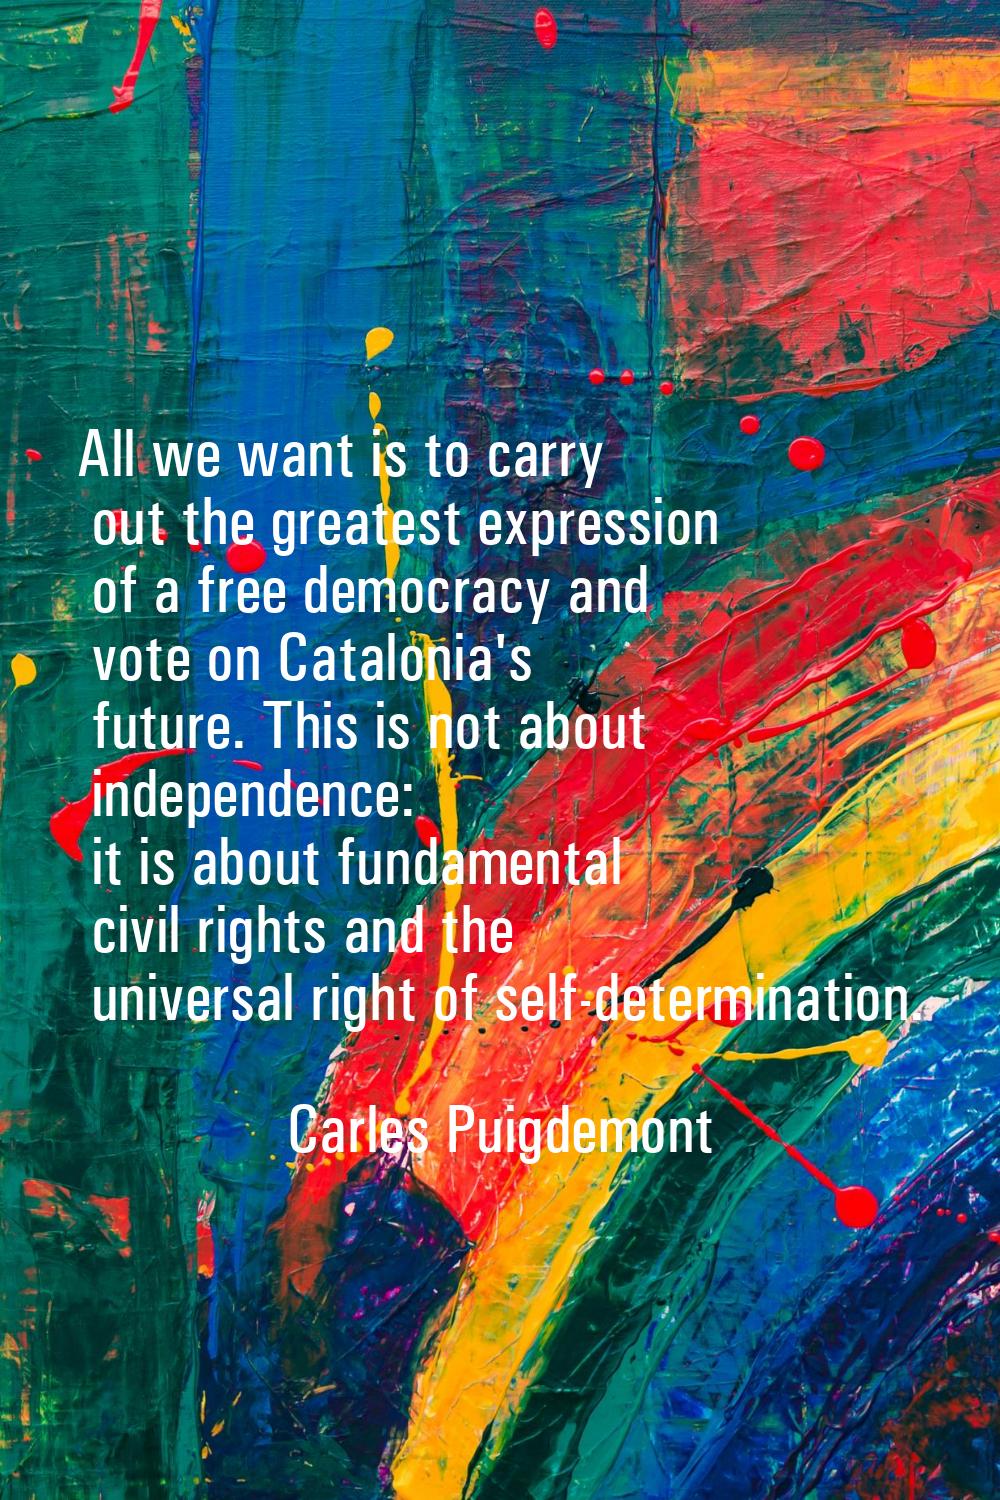 All we want is to carry out the greatest expression of a free democracy and vote on Catalonia's fut